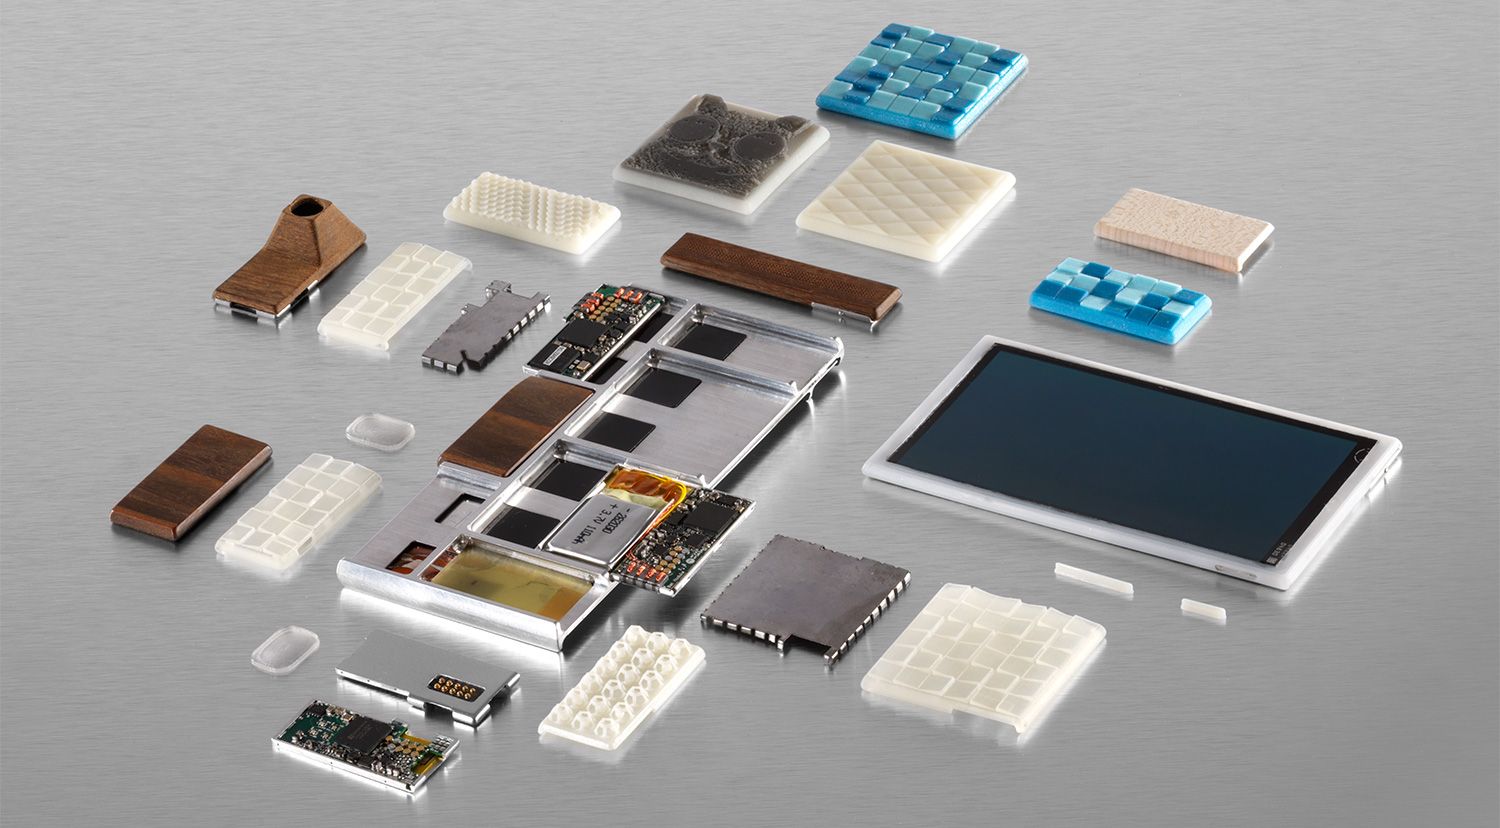 An exploded view of a Project Ara smartphone concept